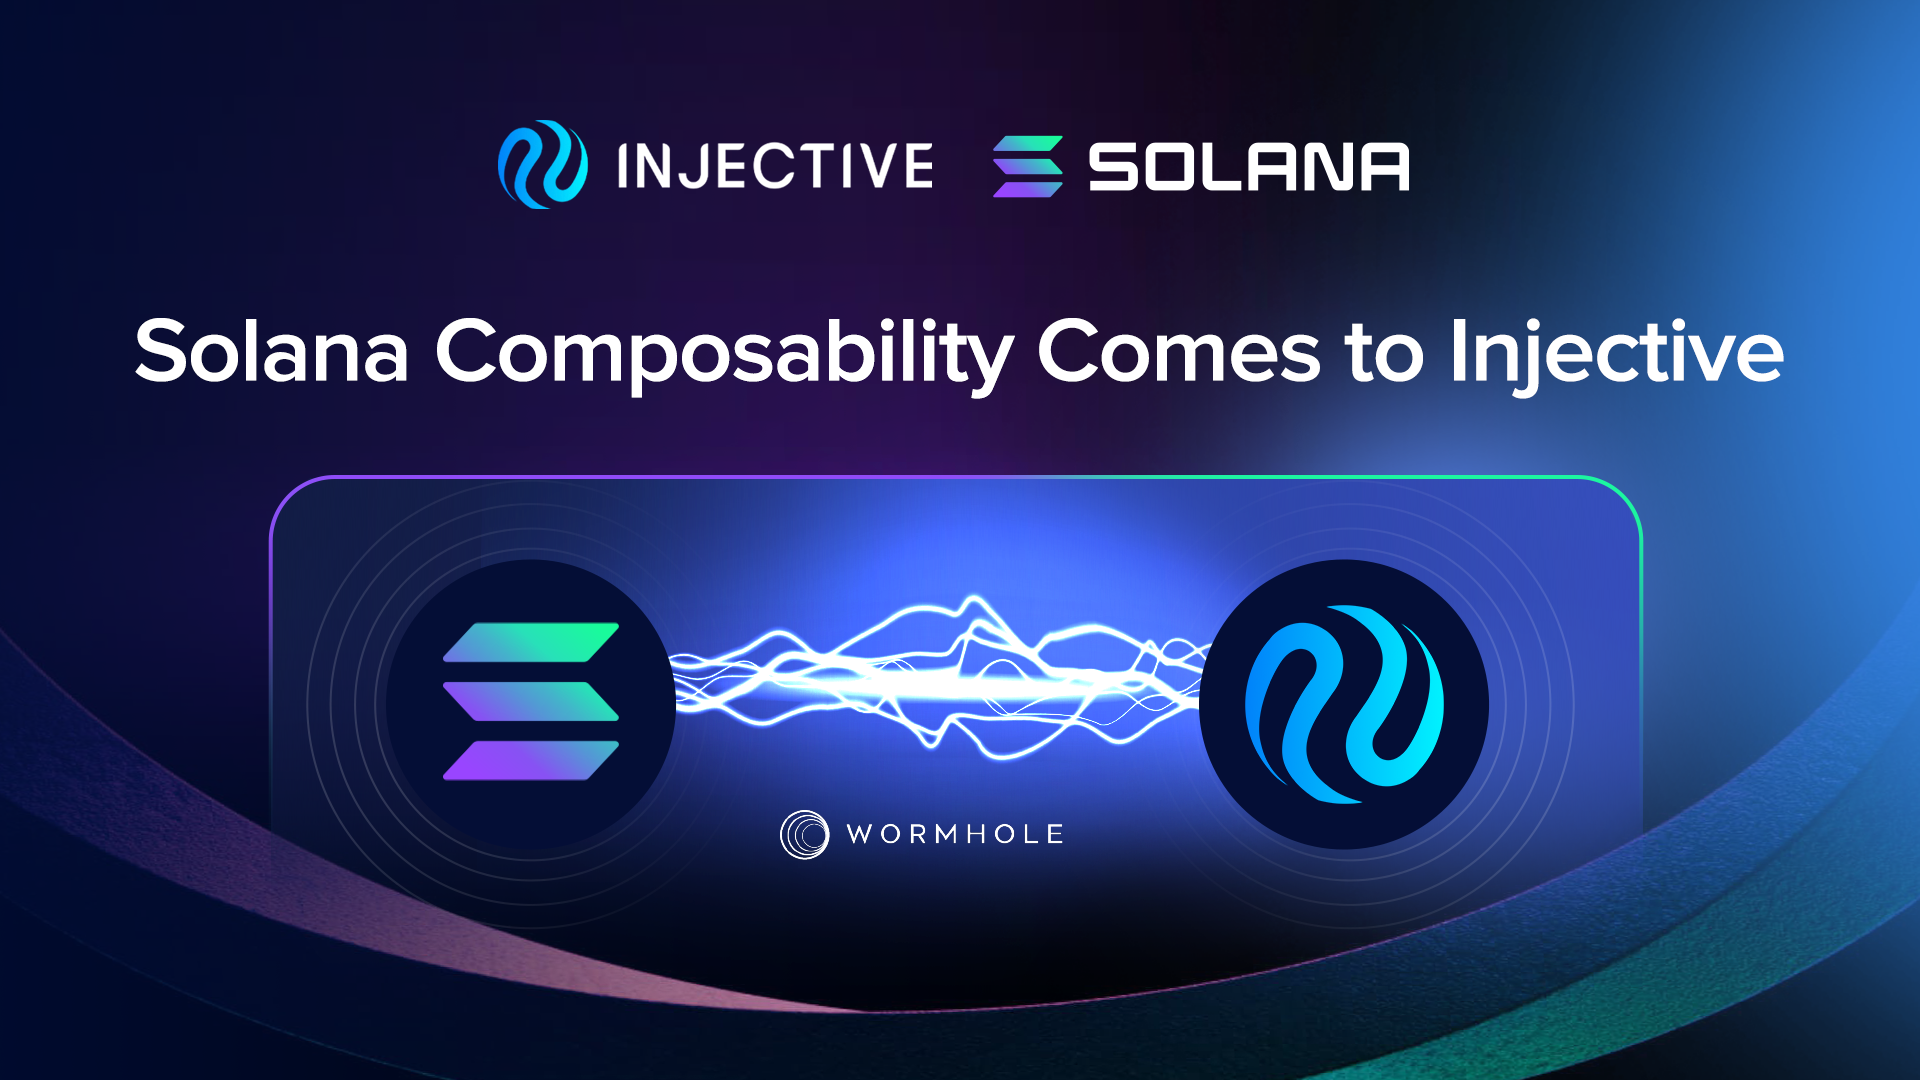 Injective Integrates Solana Assets to Introduce a New Era of Composability